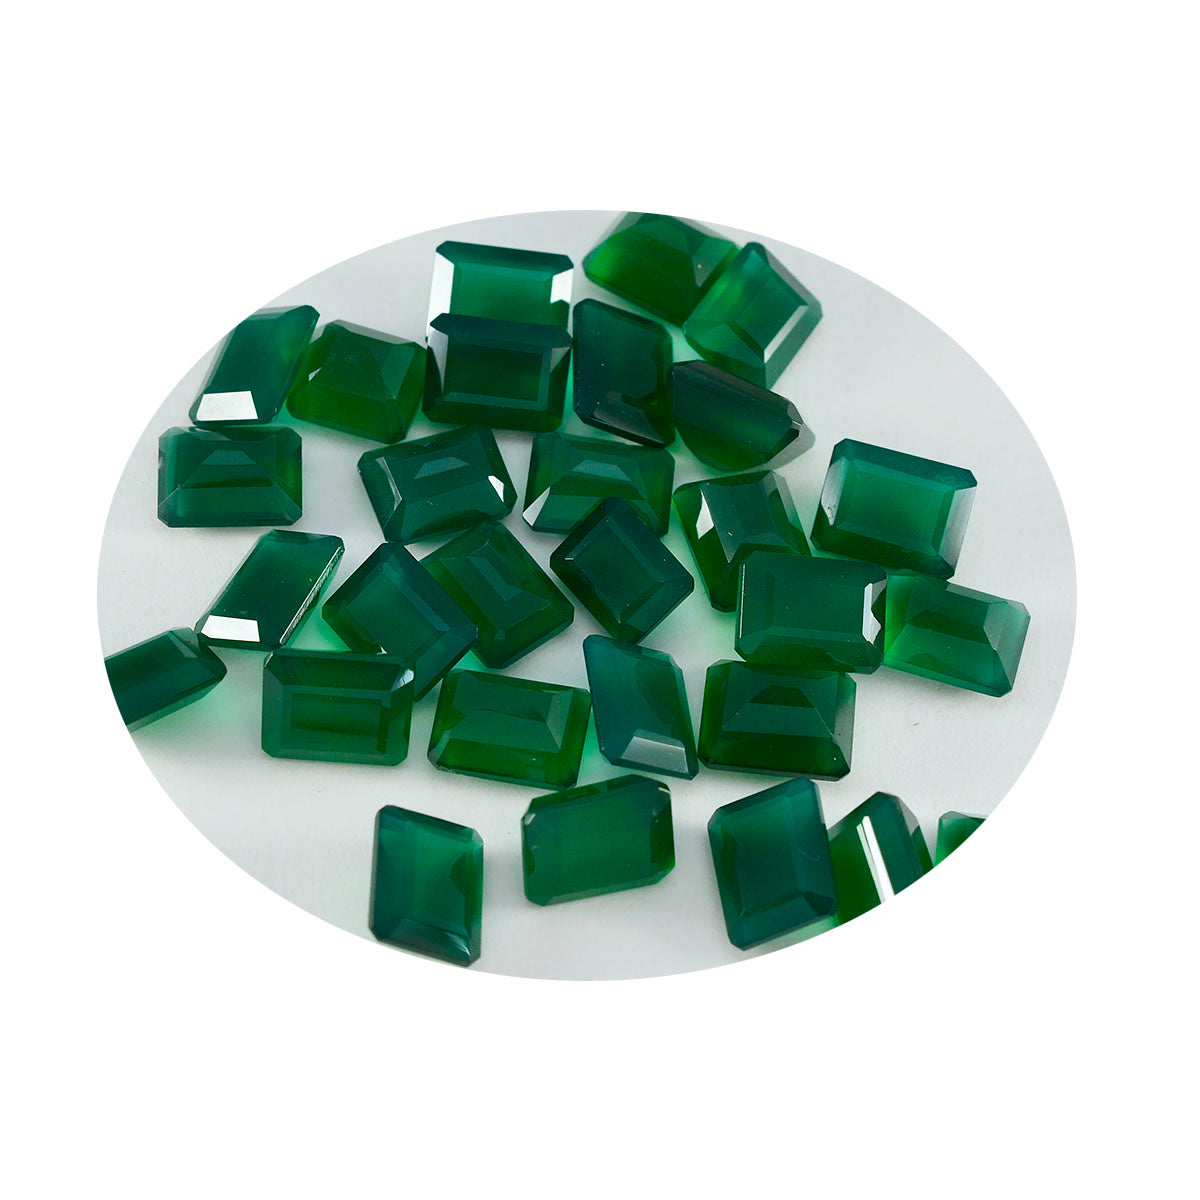 Riyogems 1PC Natural Green Onyx Faceted 3x5 mm Octagon Shape amazing Quality Loose Gem